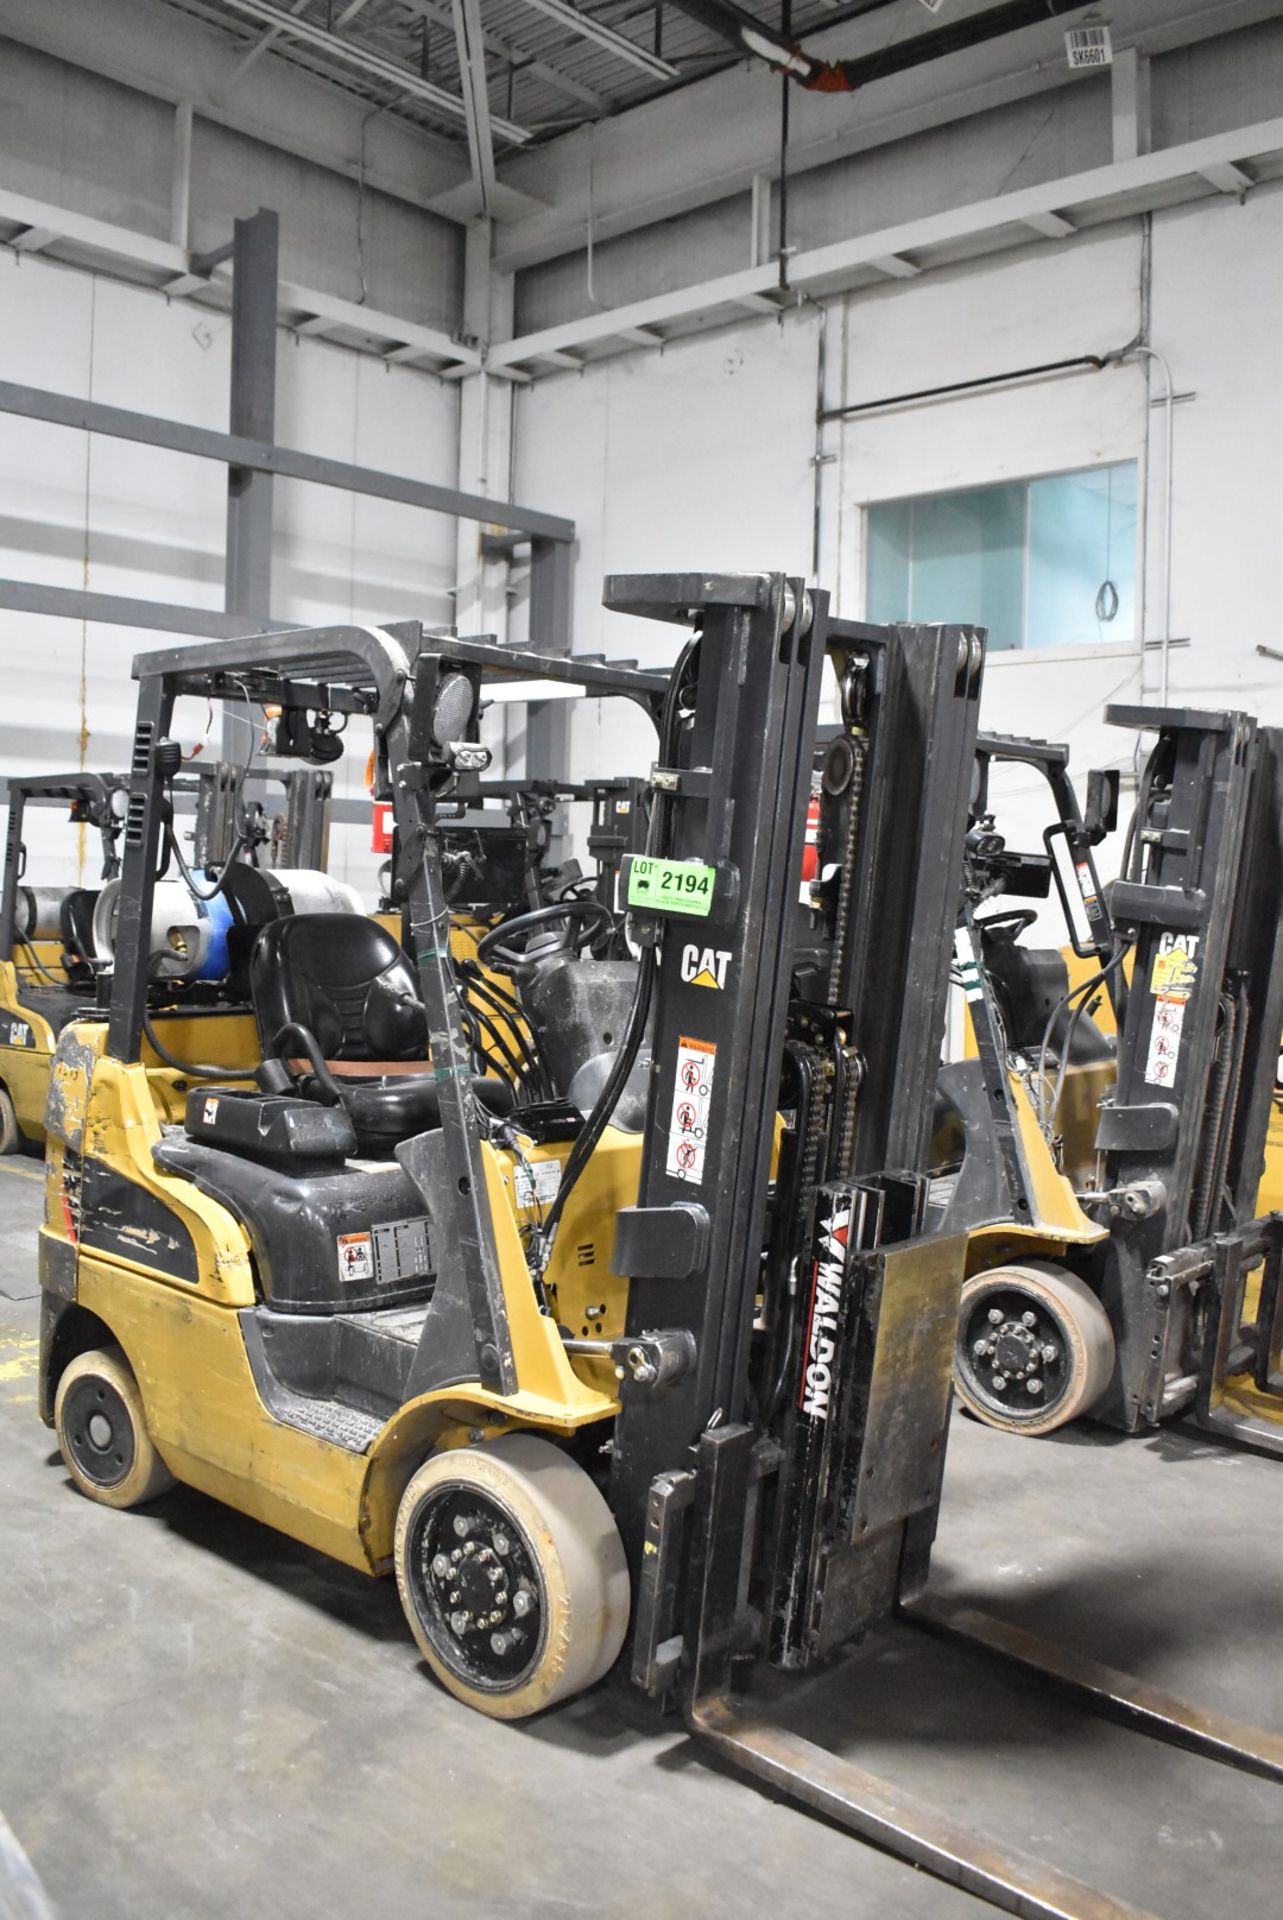 CATERPILLAR 2C5000 4,950 LBS. CAPACITY LPG FORKLIFT WITH 187" MAX VERTICAL REACH, 3-STAGE HIGH - Image 2 of 9